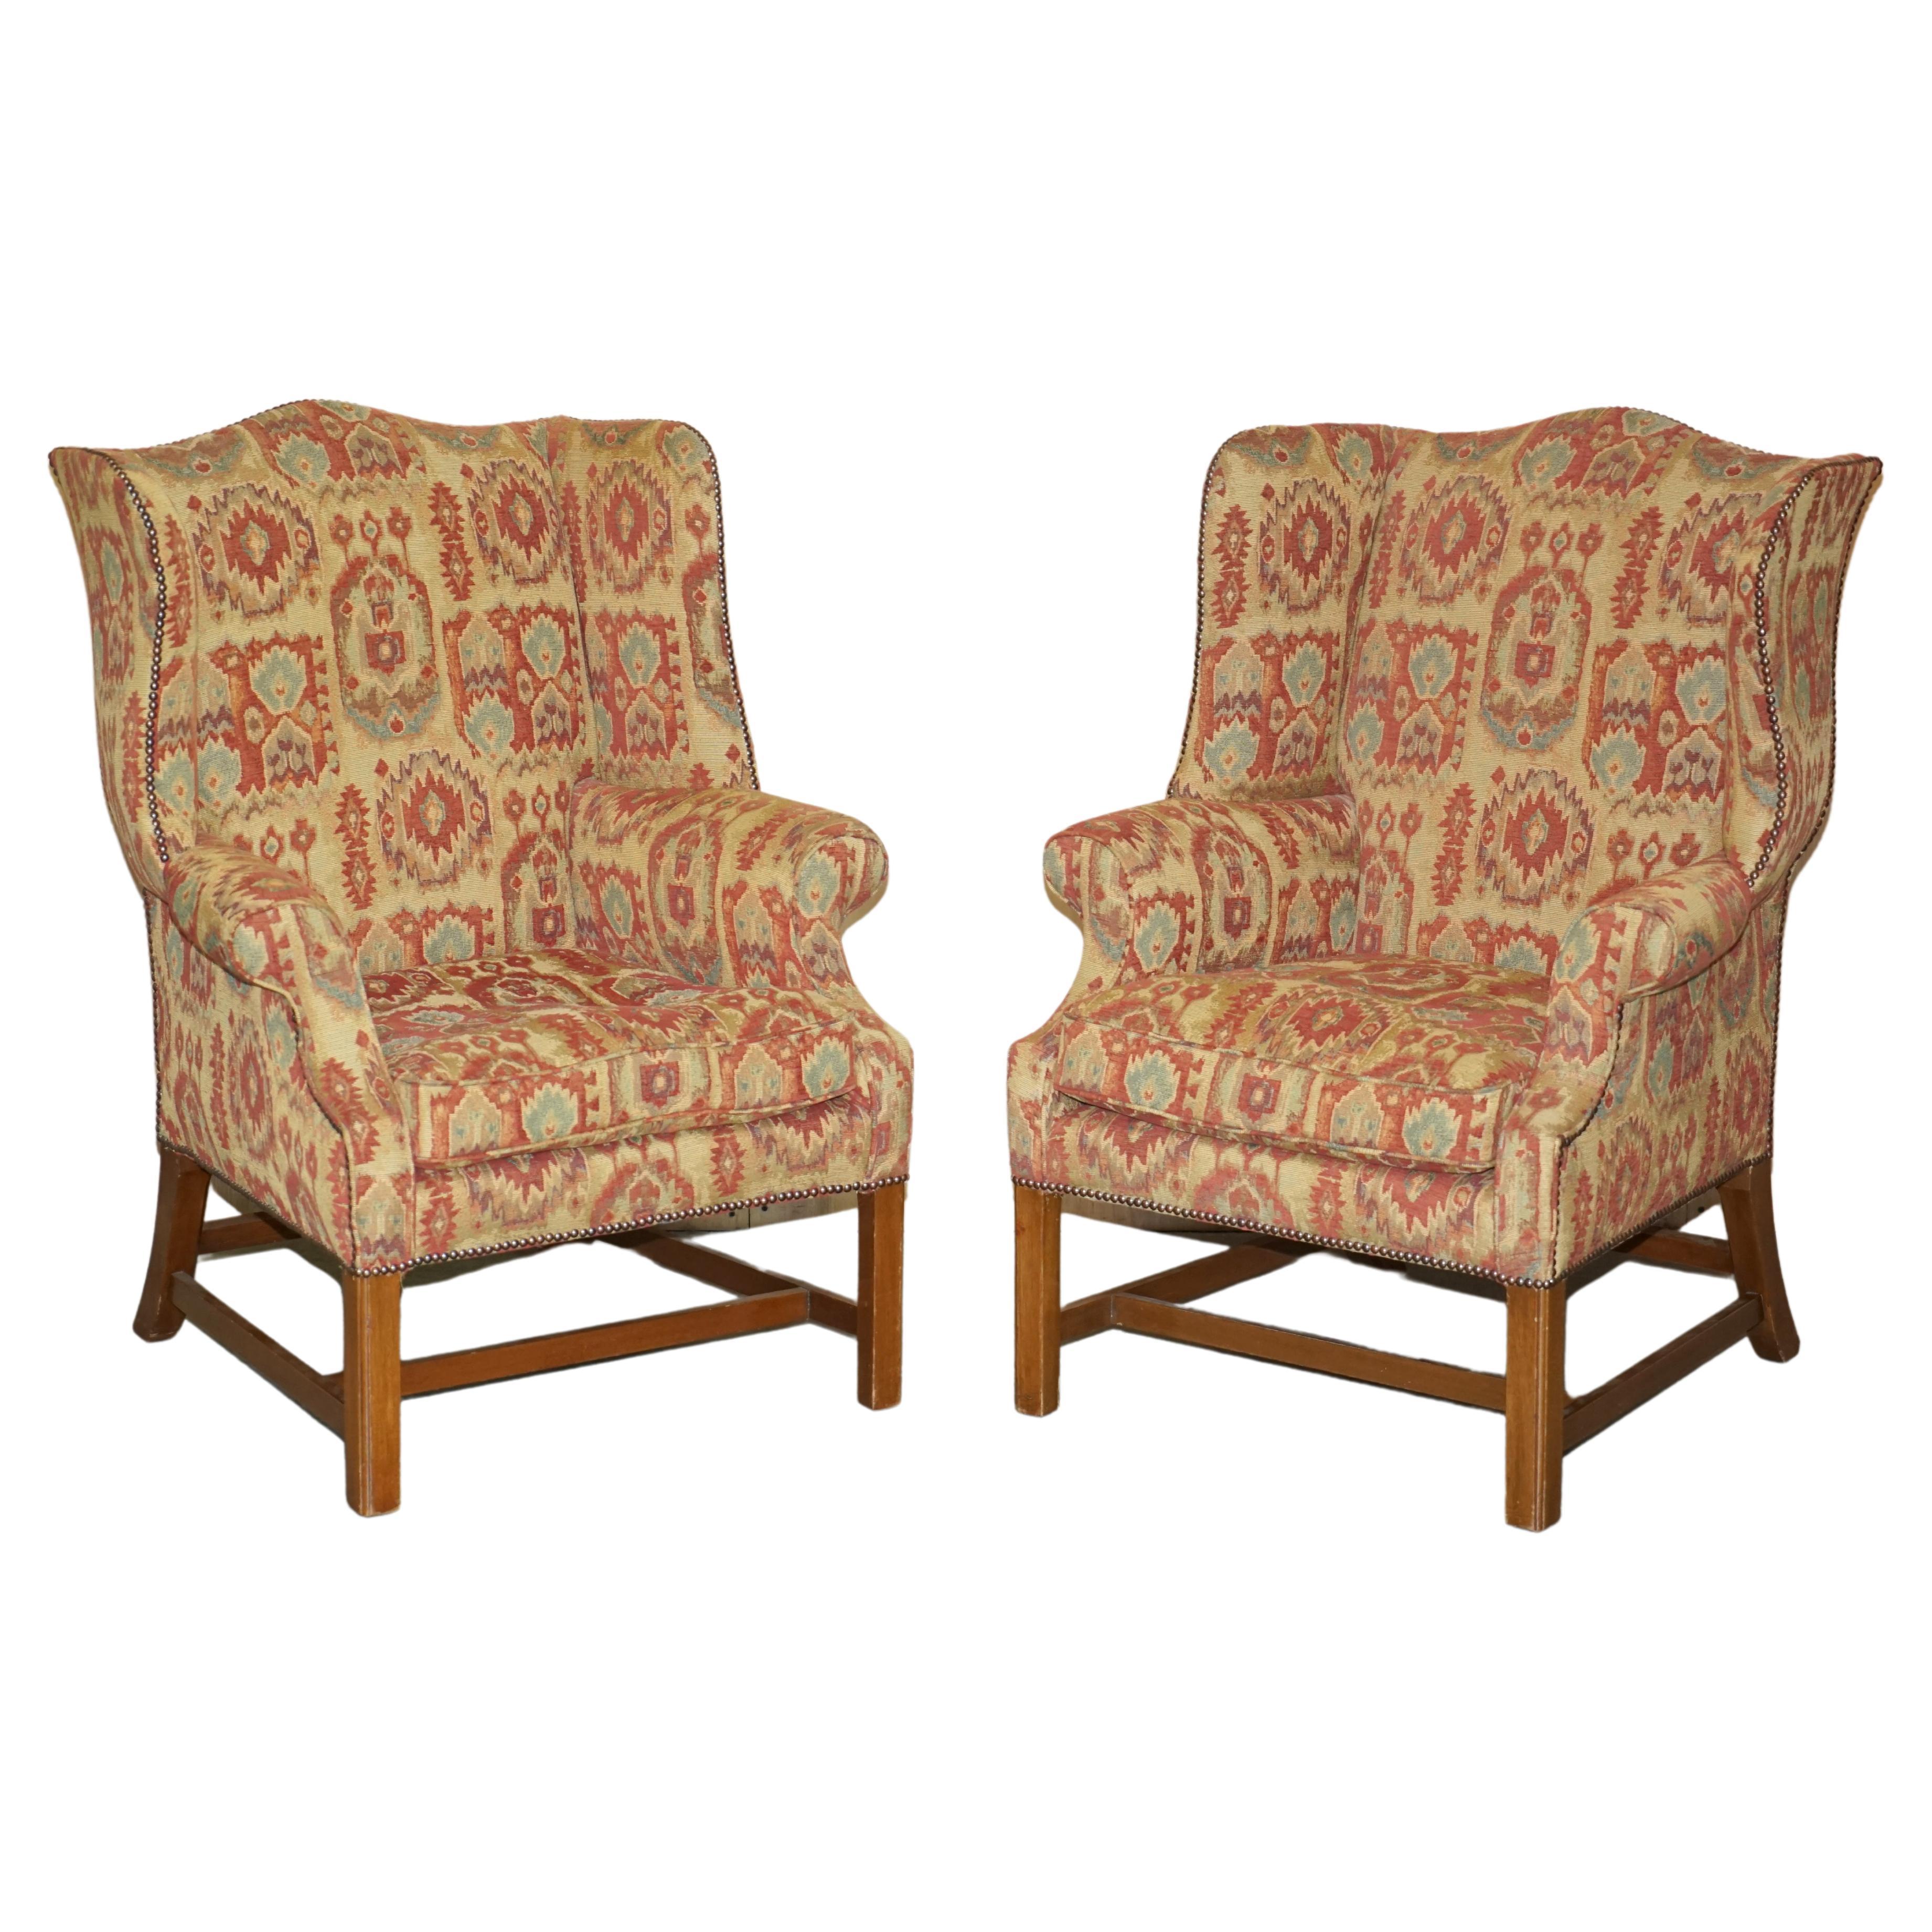 Pair of Lovely George III Style Wingback Armchairs with Kilim Pattern Uphosltery For Sale